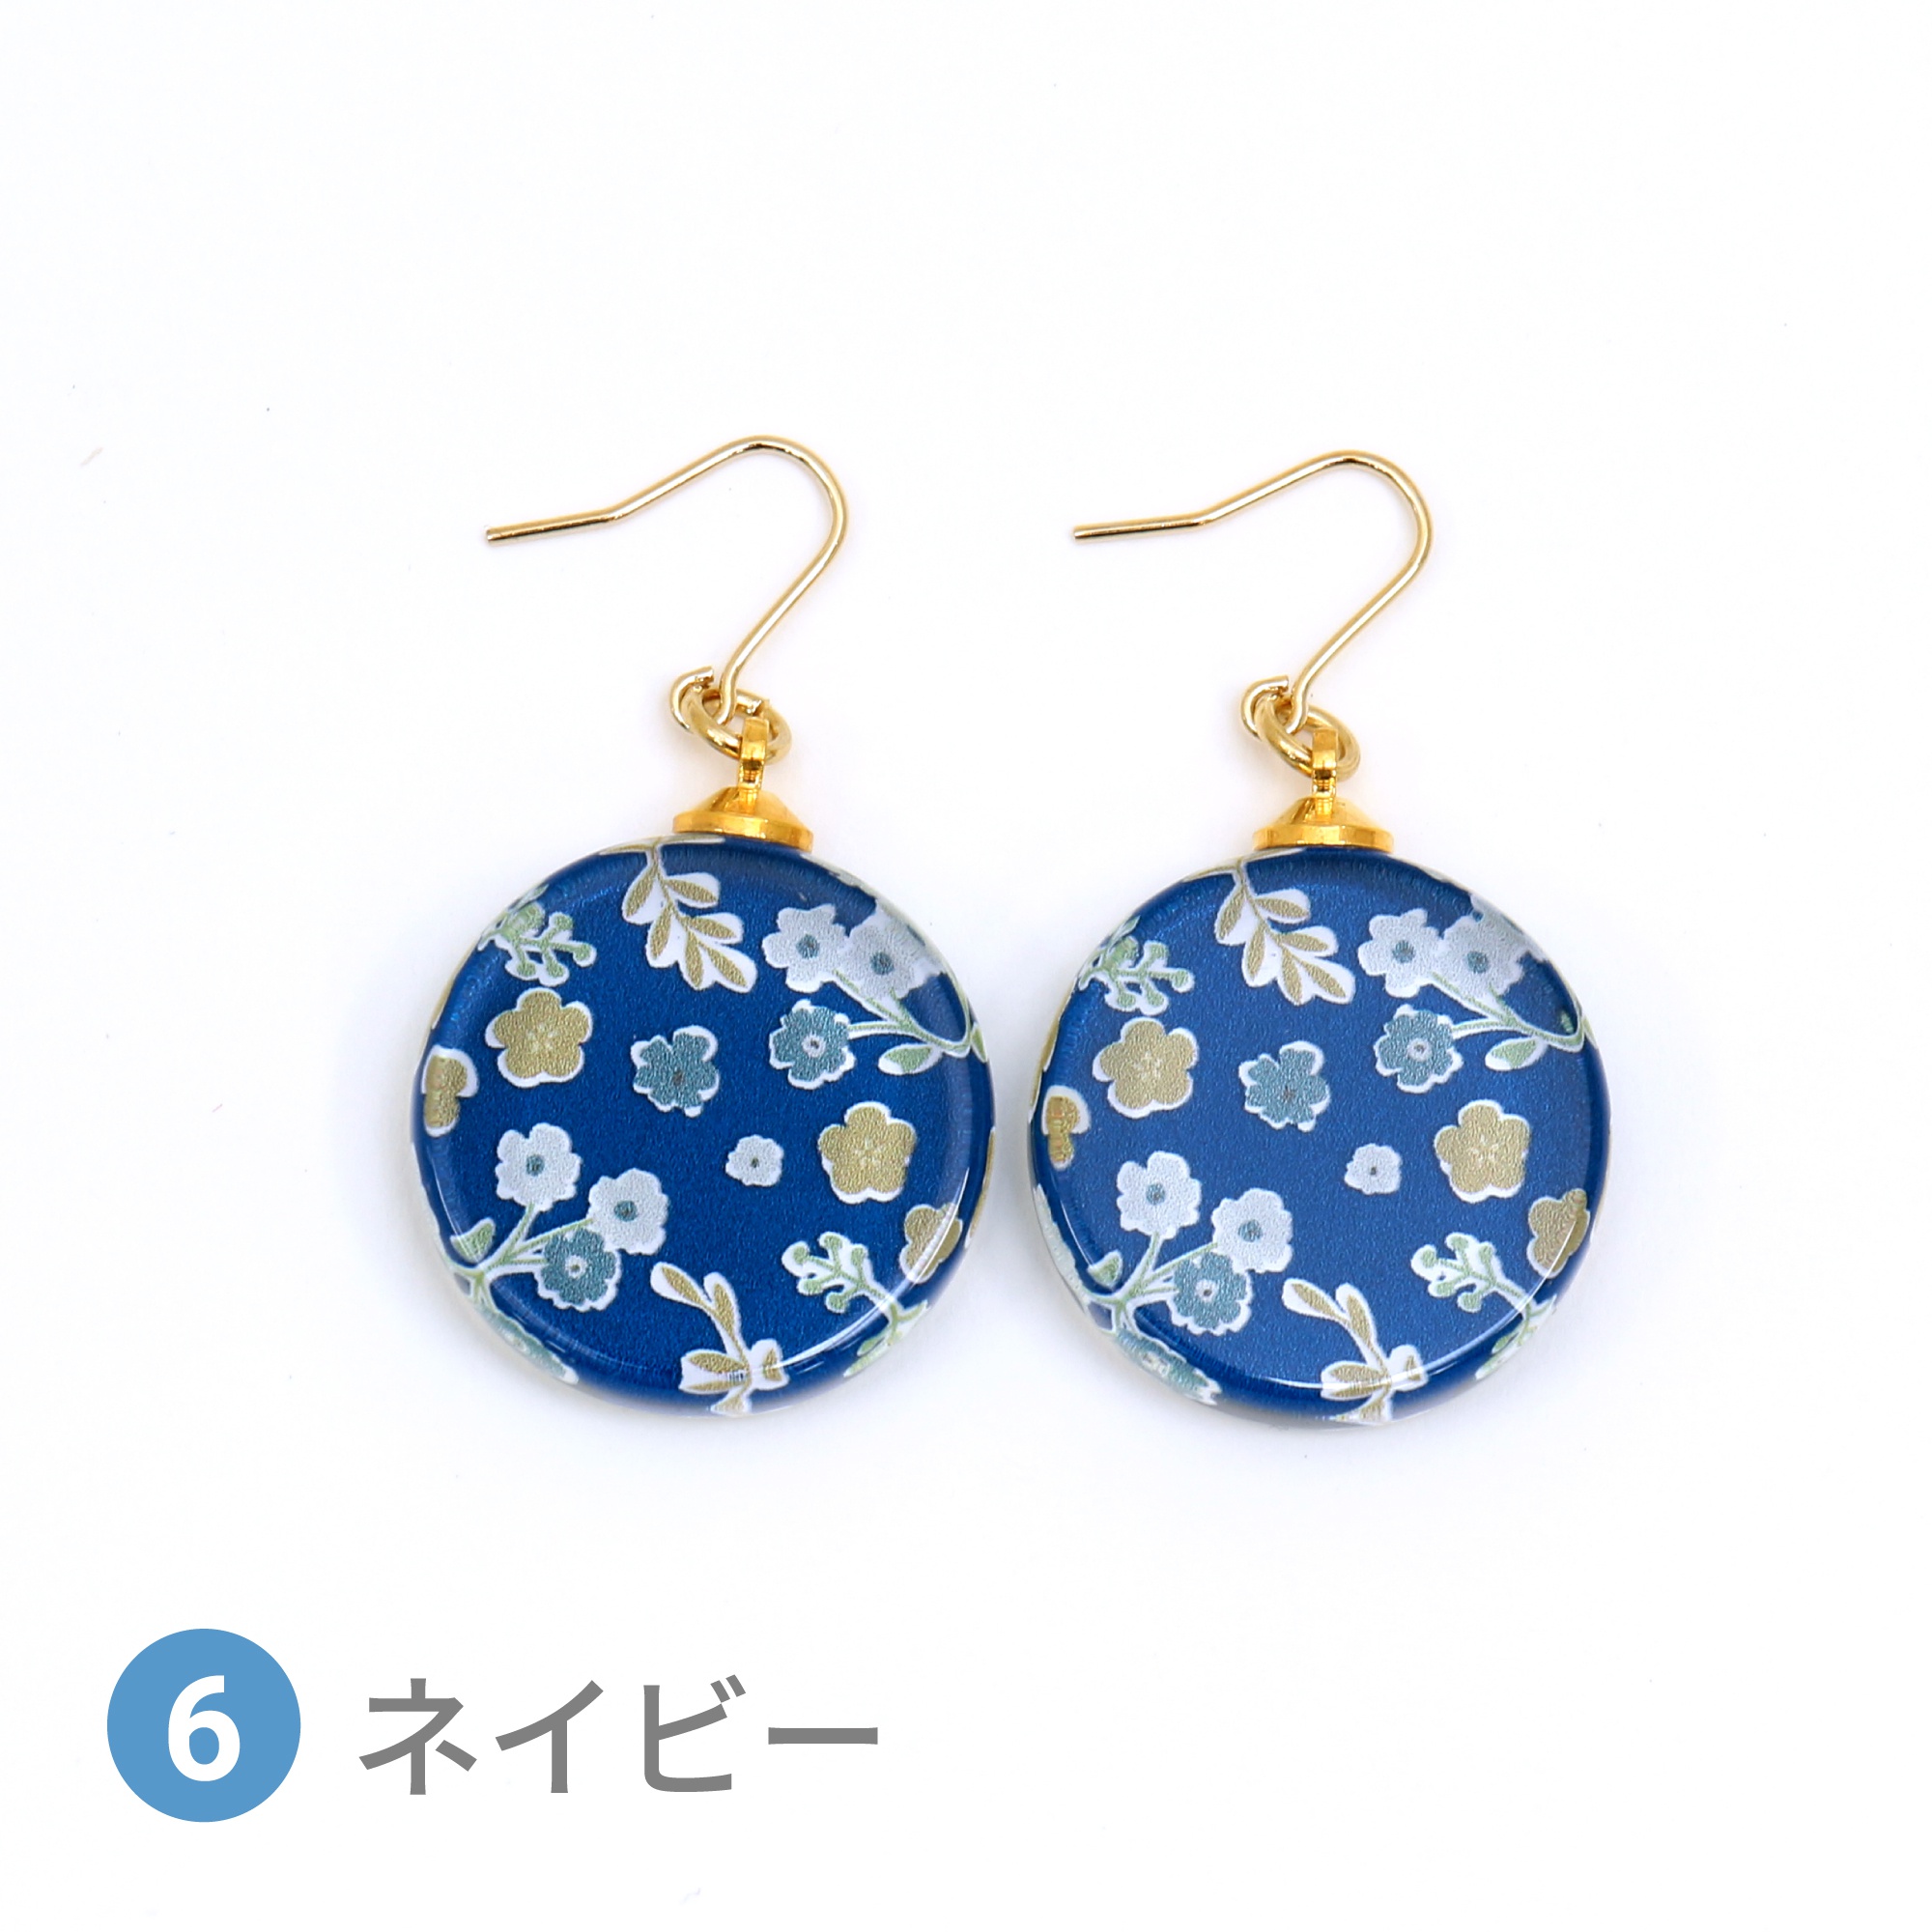 Glass accessories Pierced Earring FLORAL PATTERN navy round shape